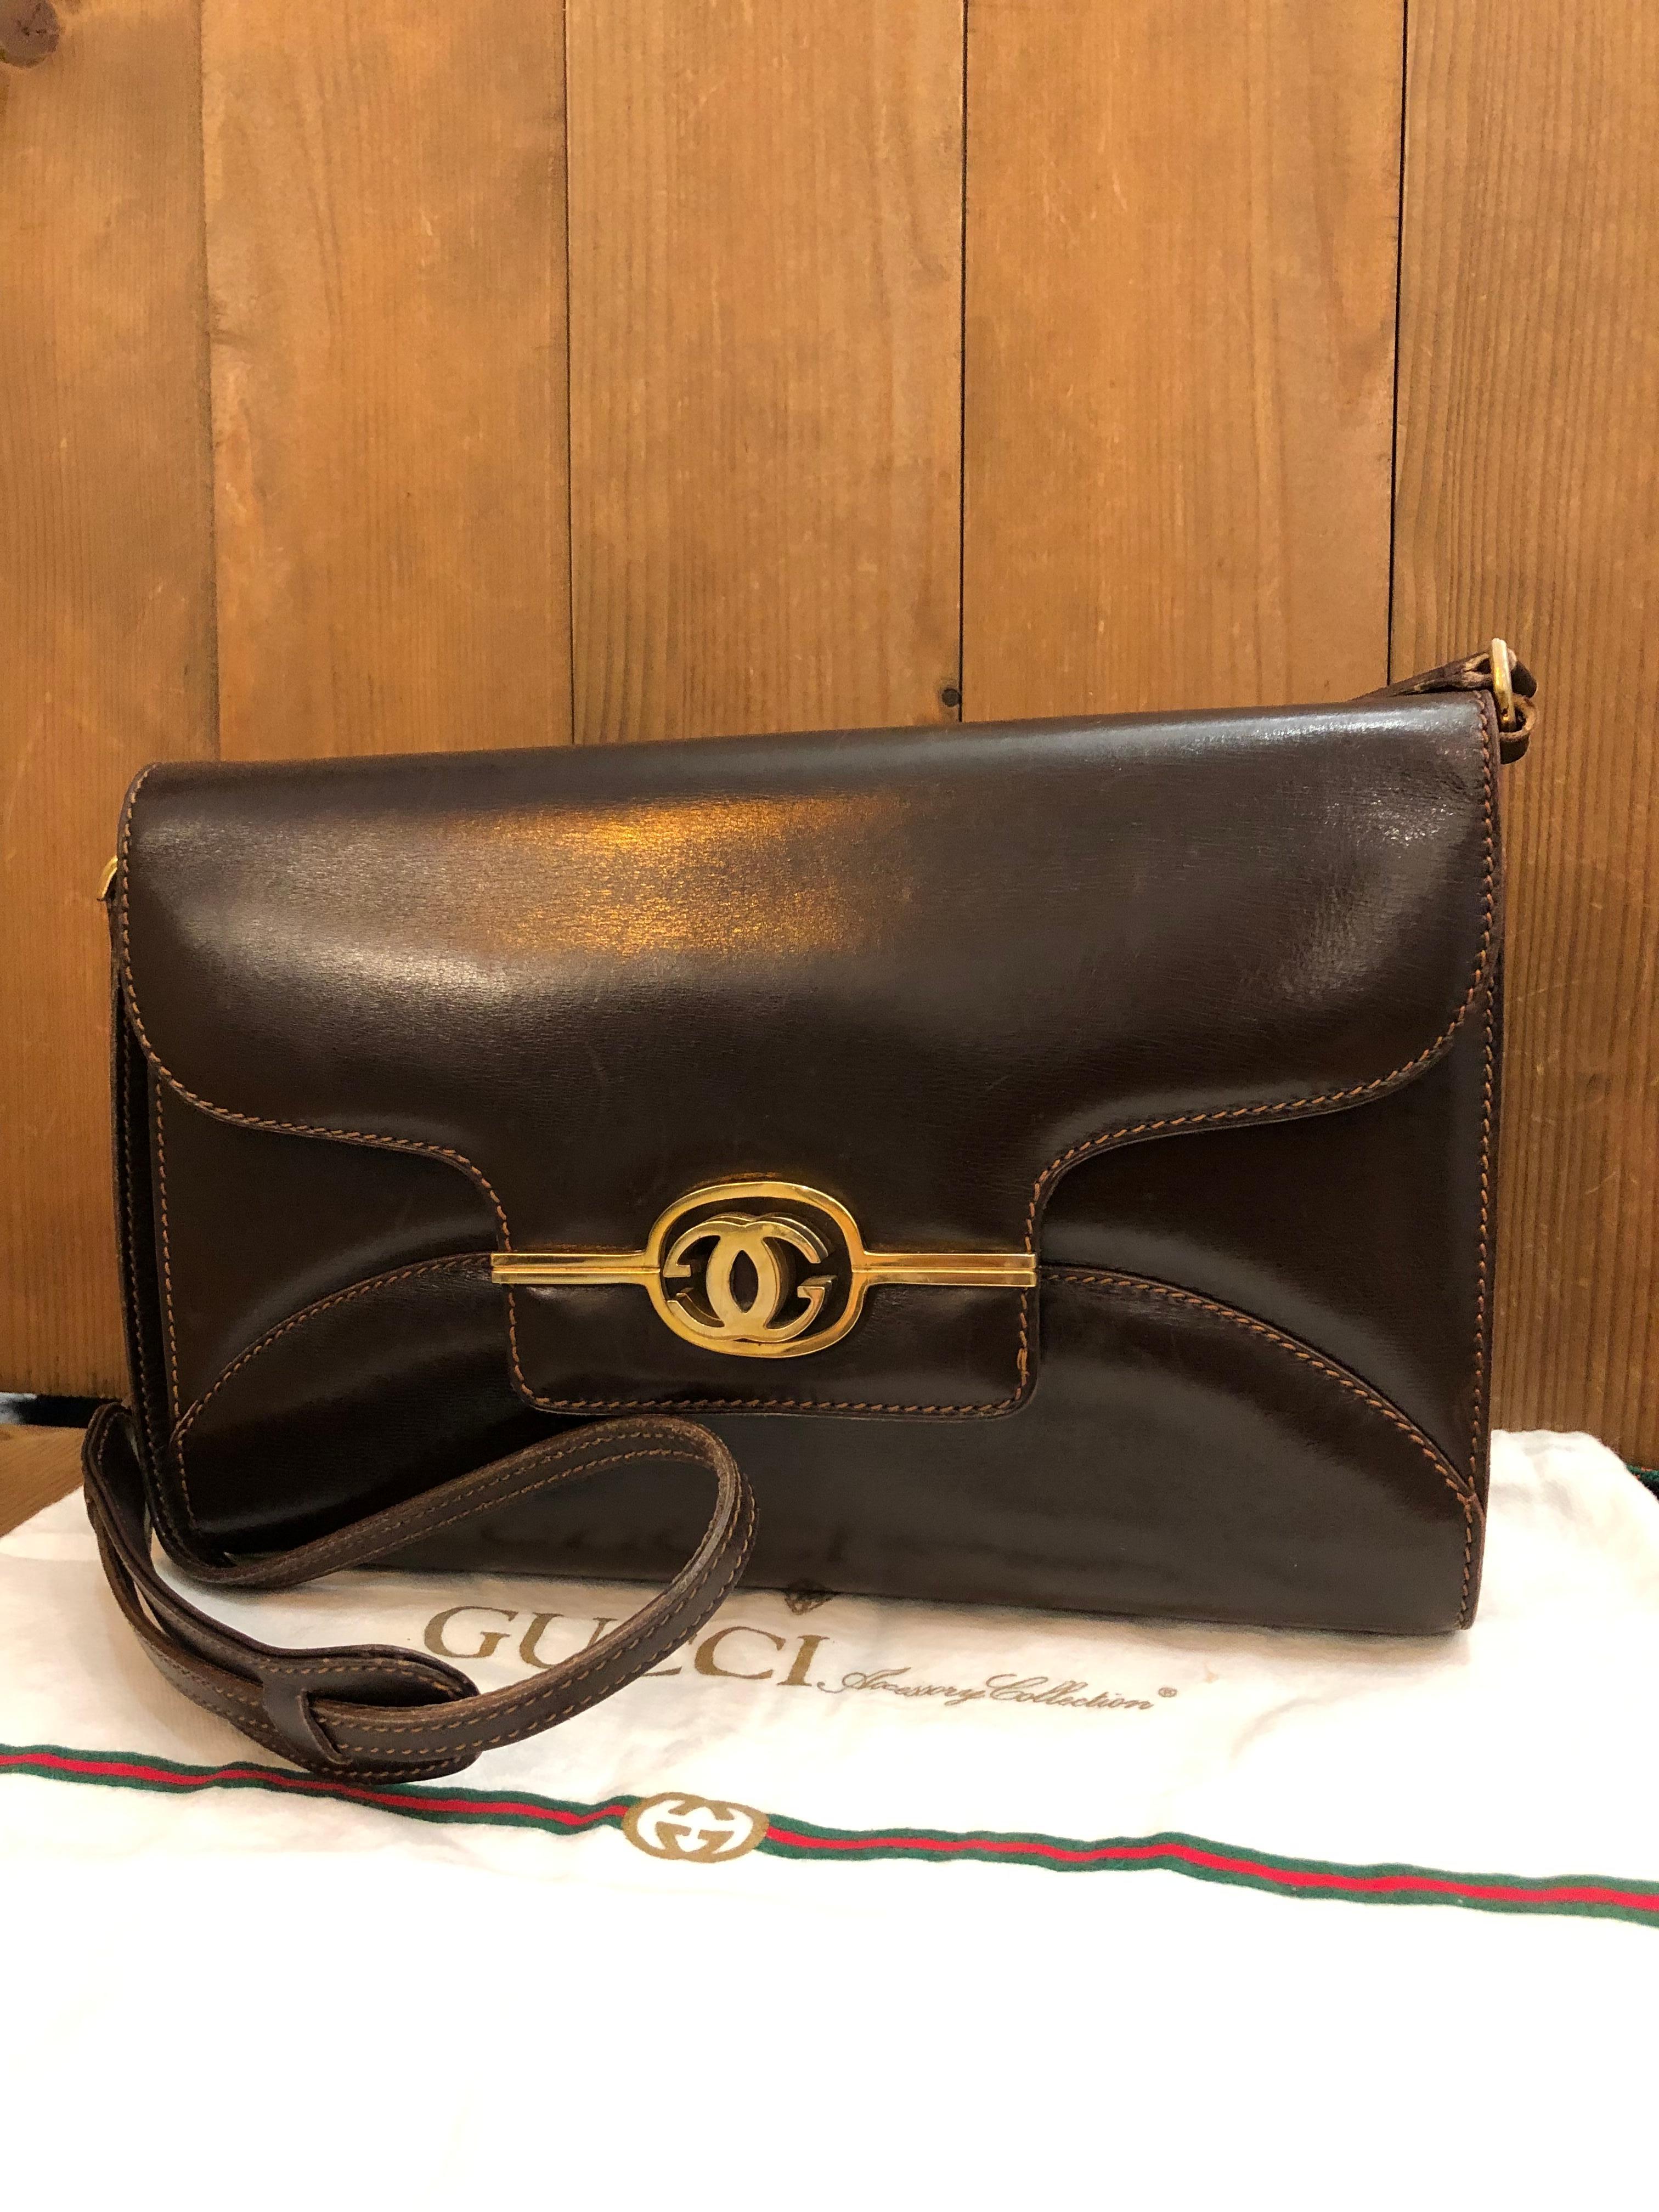 This vintage GUCCI two-way clutch shoulder bag is crafted of smooth calfskin leather in dark brown featuring gold toned hardware. Front flap huge GG turnlock closure opens to a brown leather interior featuring a patch pocket. This vintage Gucci